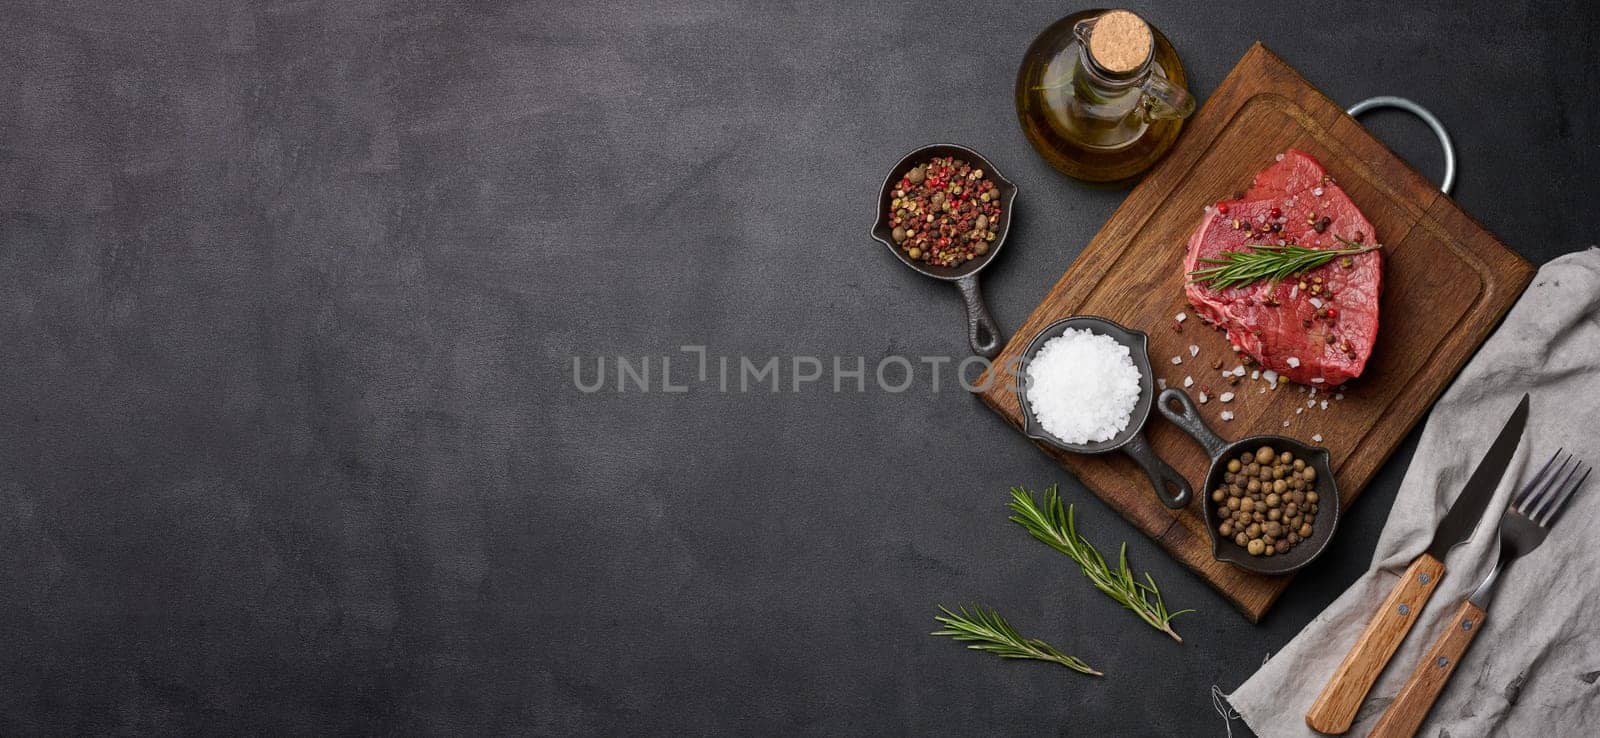 Raw piece of beef with spices pepper, rosemary sprig, salt and olive oil on a wooden board, black background by ndanko